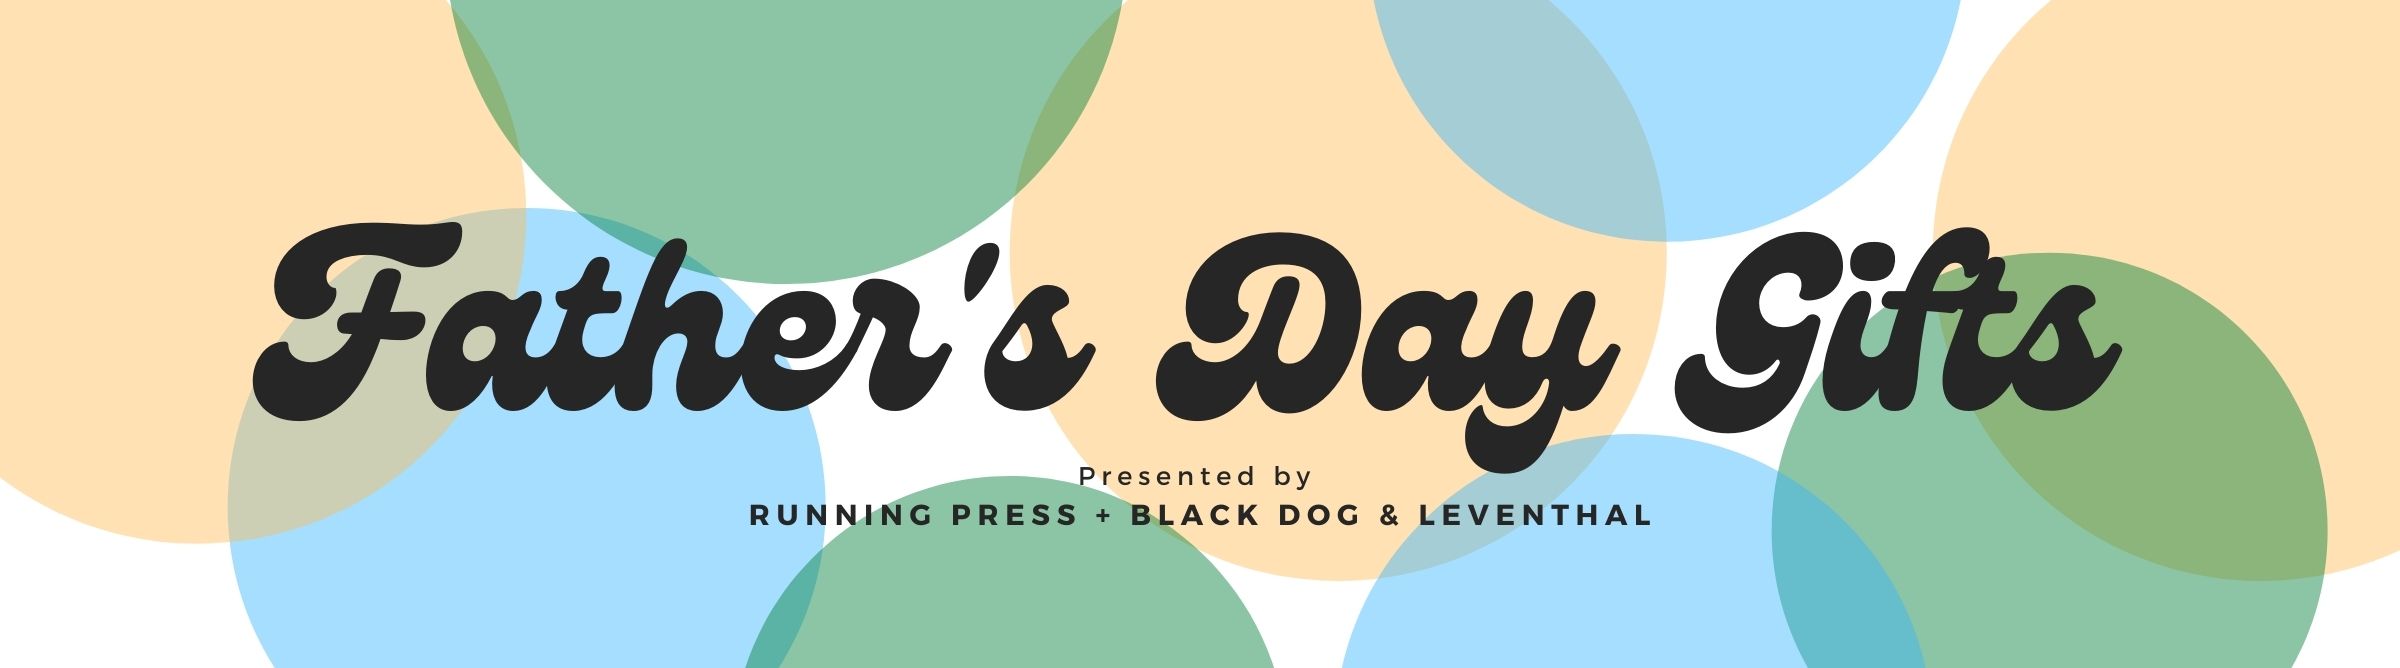 Father's Day Gifts from Running Press and Black Dog and Leventhal